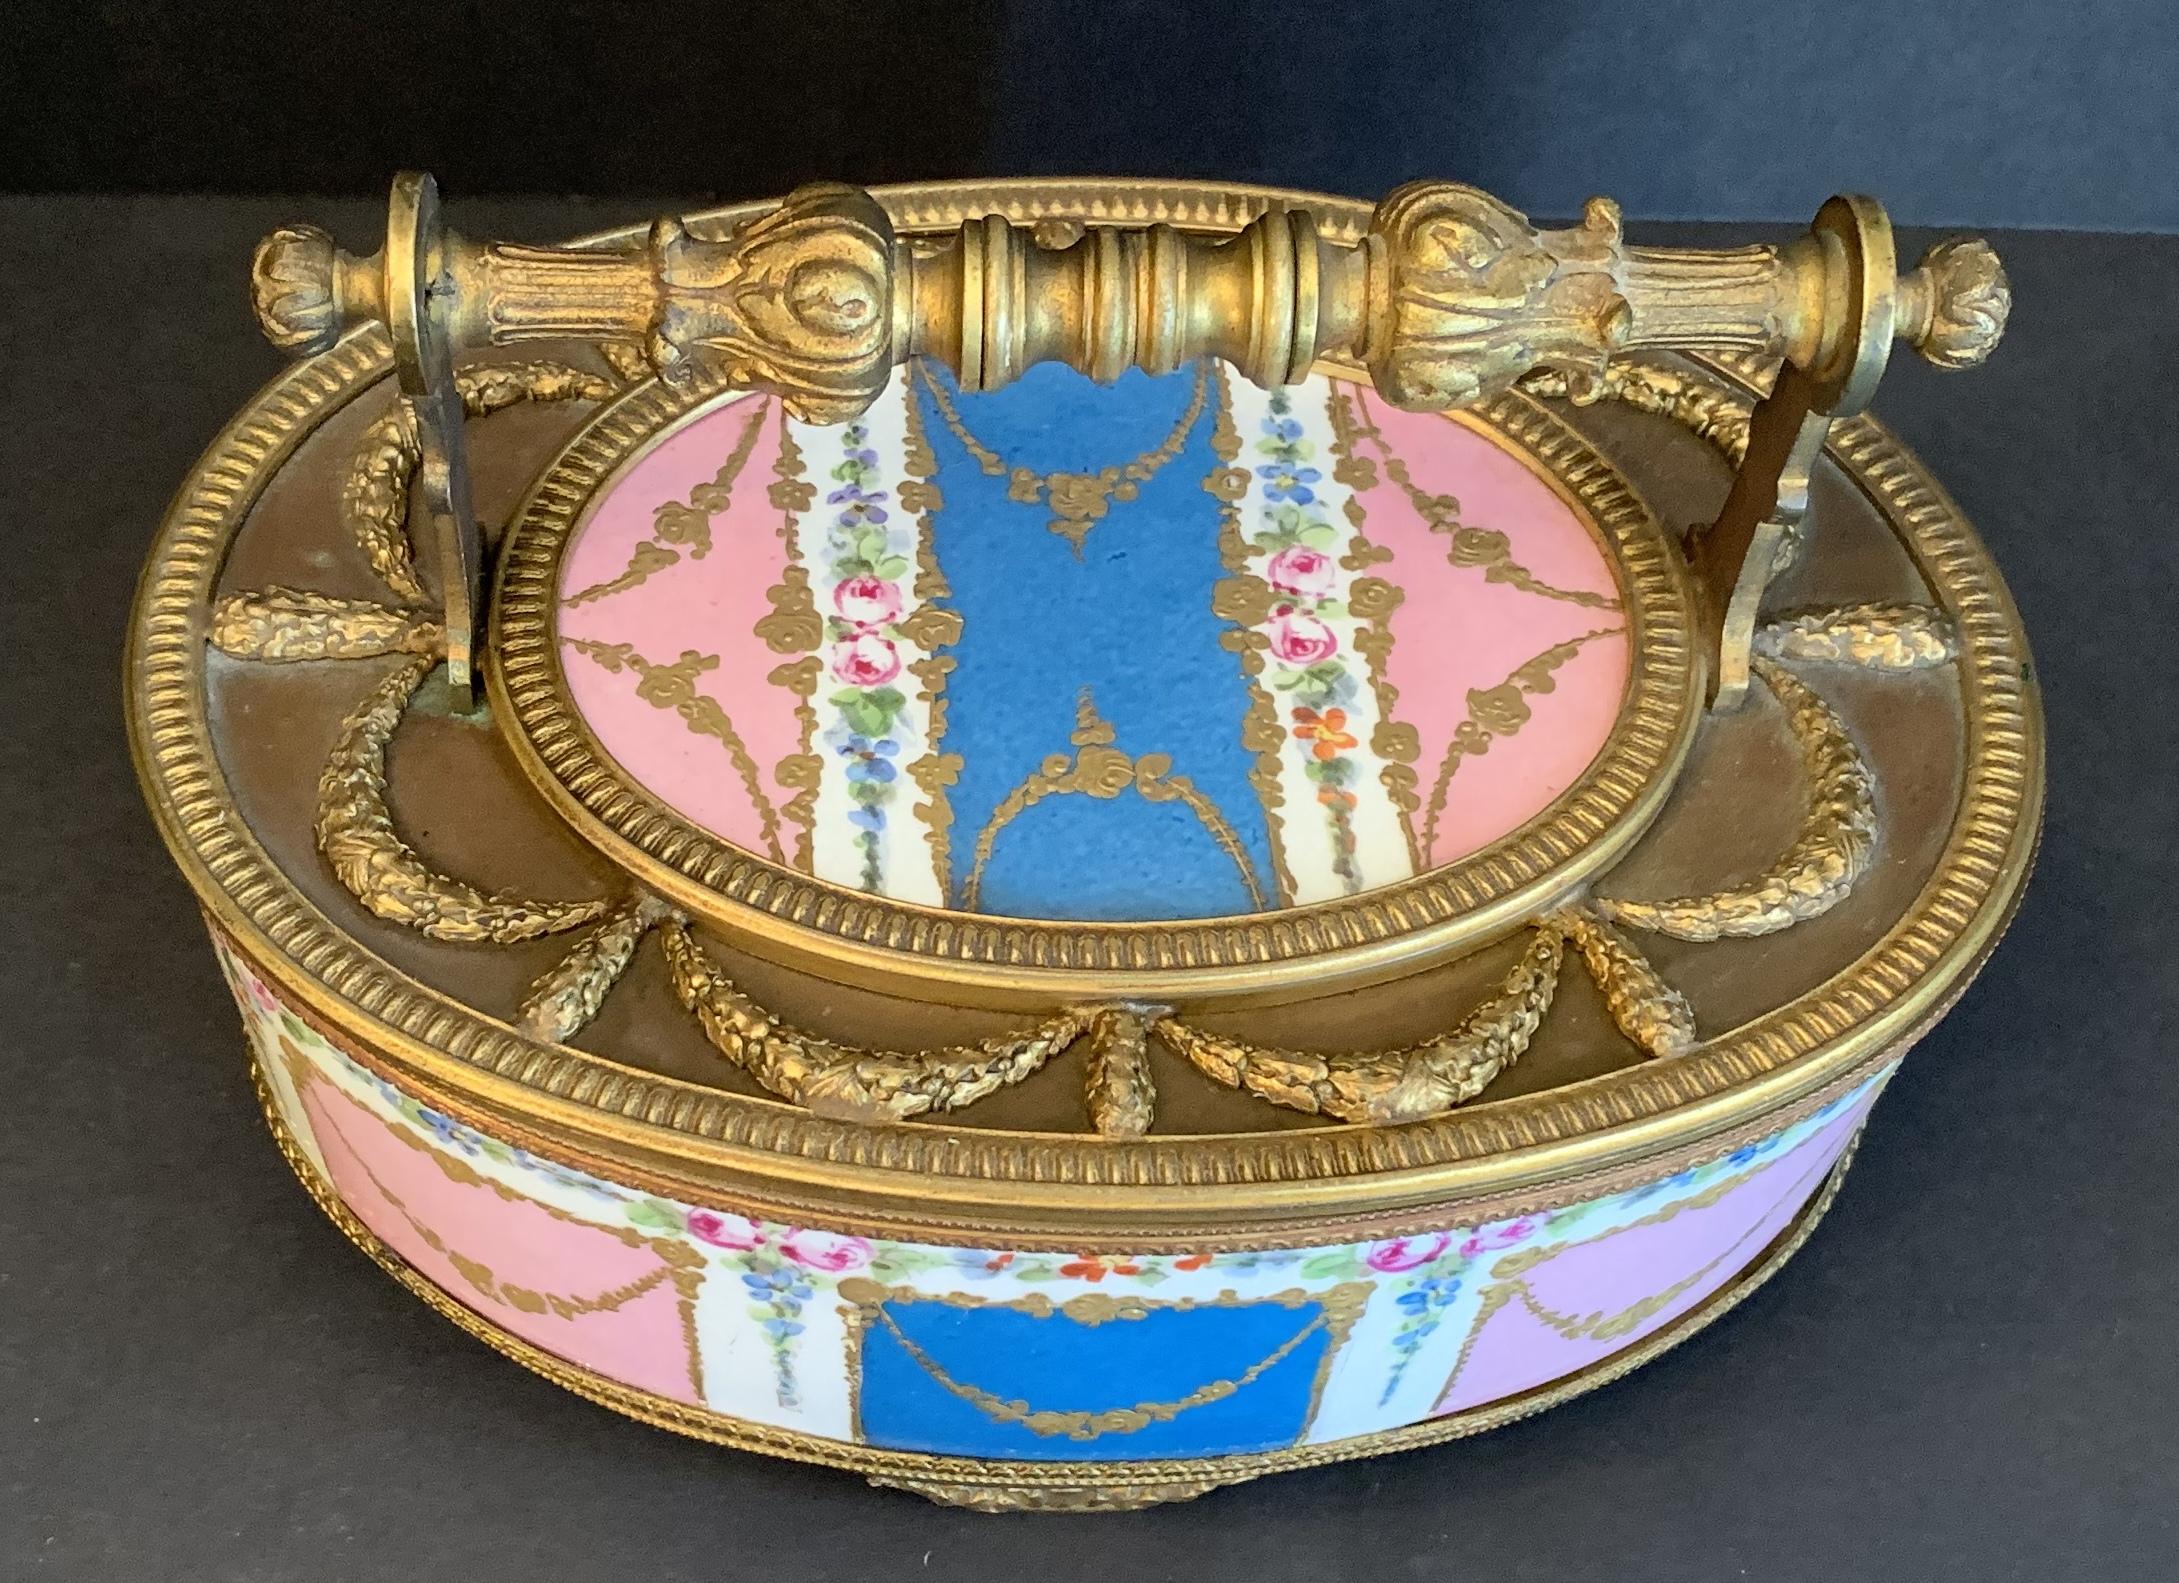 A wonderful French hand painted swag Sèvres Porcelain and bronze ormolu mounted oval casket box with removable lid raised on bronze acanthus leaf feet.